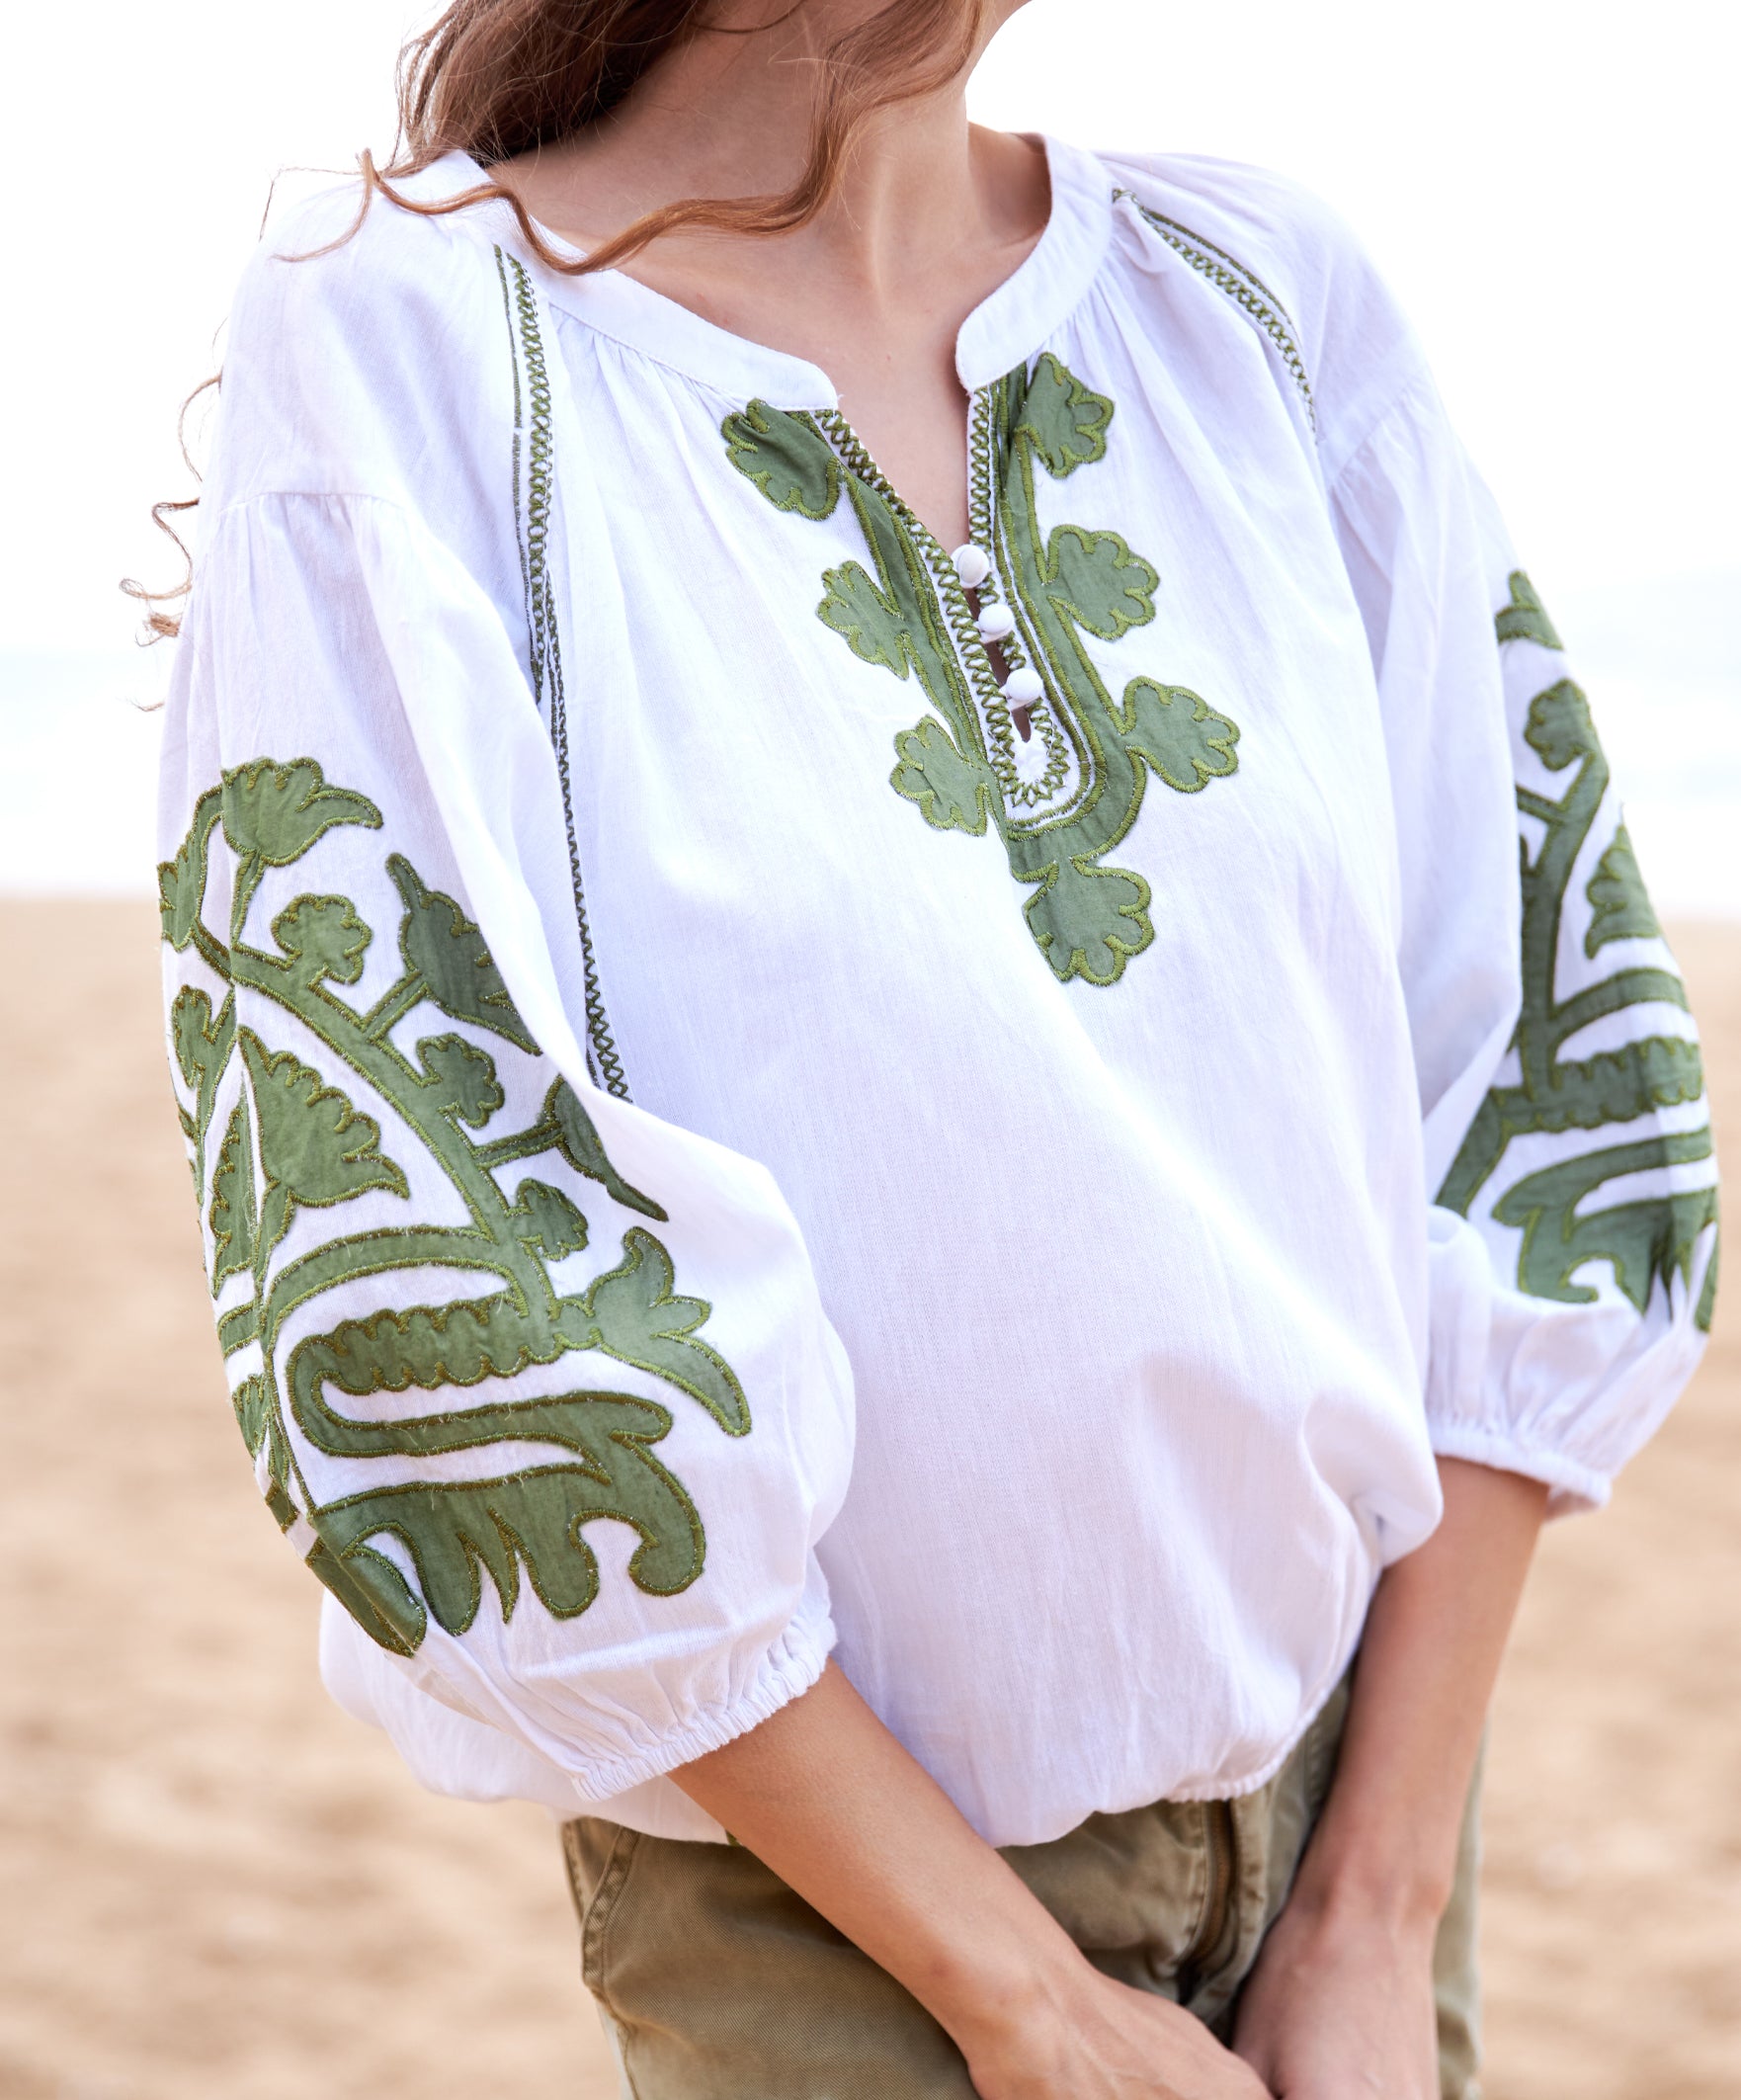 Close up of a premium white cotton top with olive green appliqué motifs, and olive shorts.